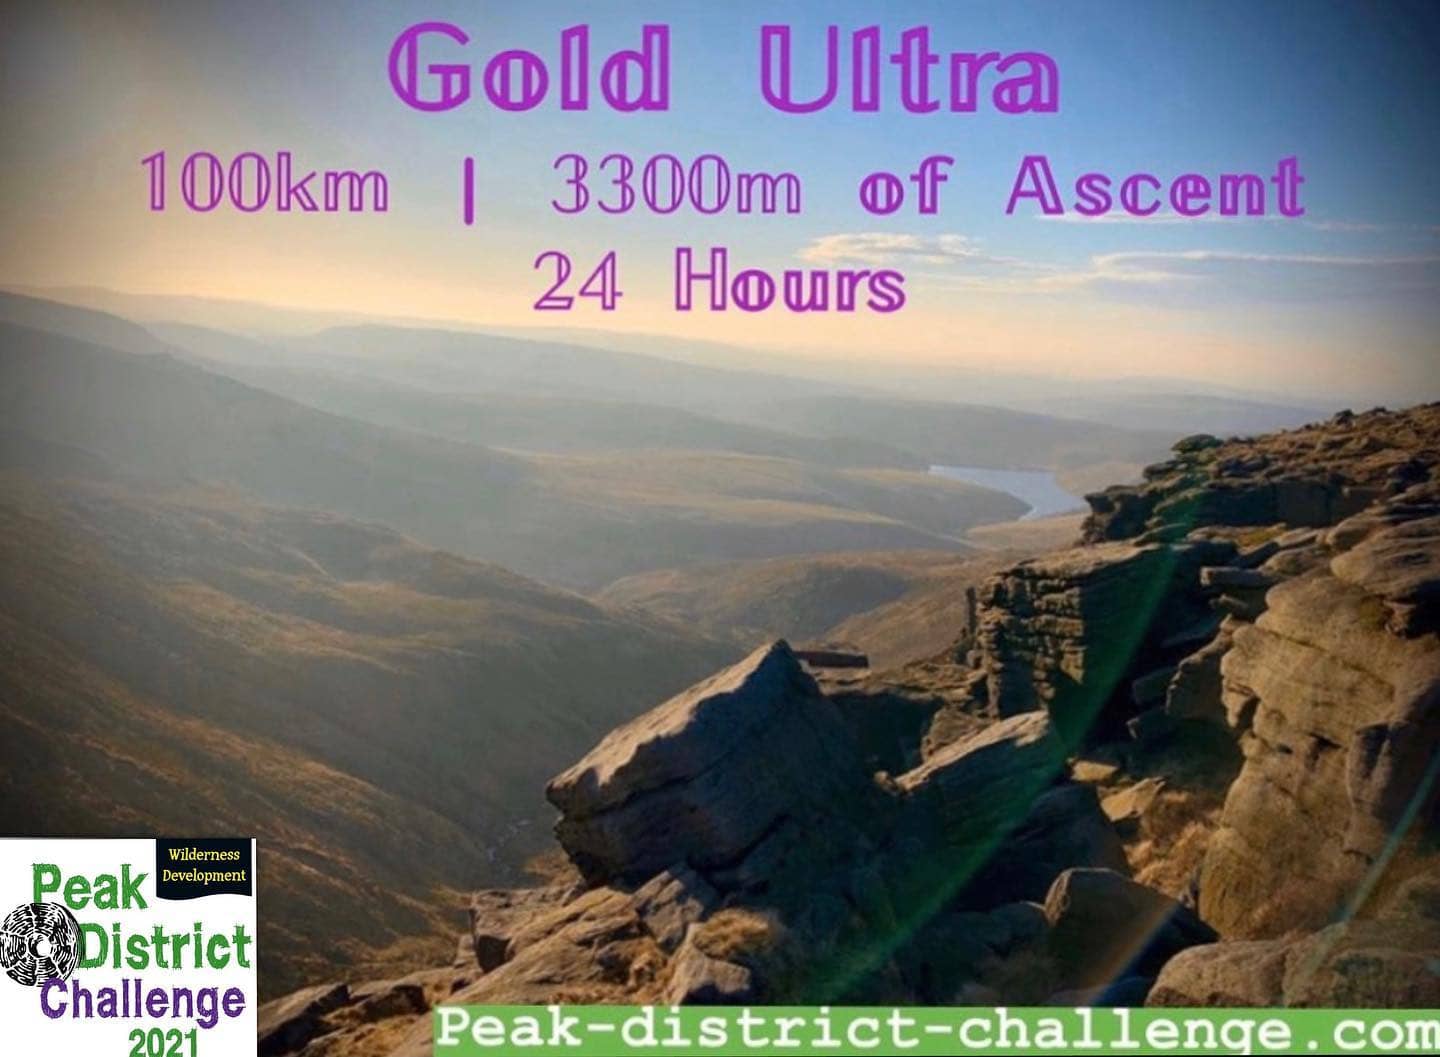 Taking part in this year’s Peak District Challenge Gold Ultra 100km route will give you 4 qualify...